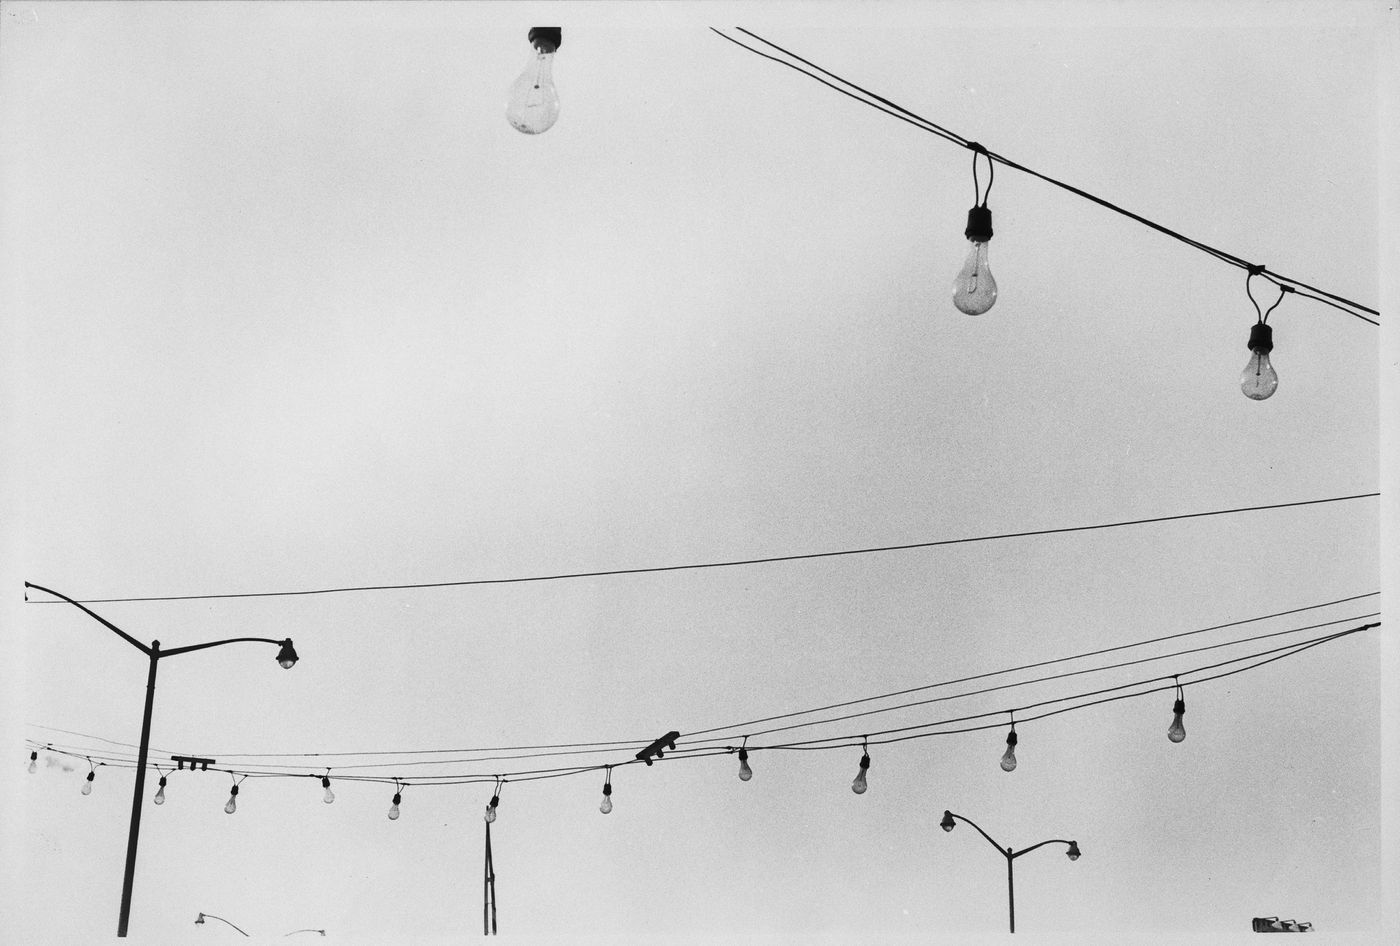 View of strings of lights and lampposts, Bruckner Boulevard, Queens, New York City, New York